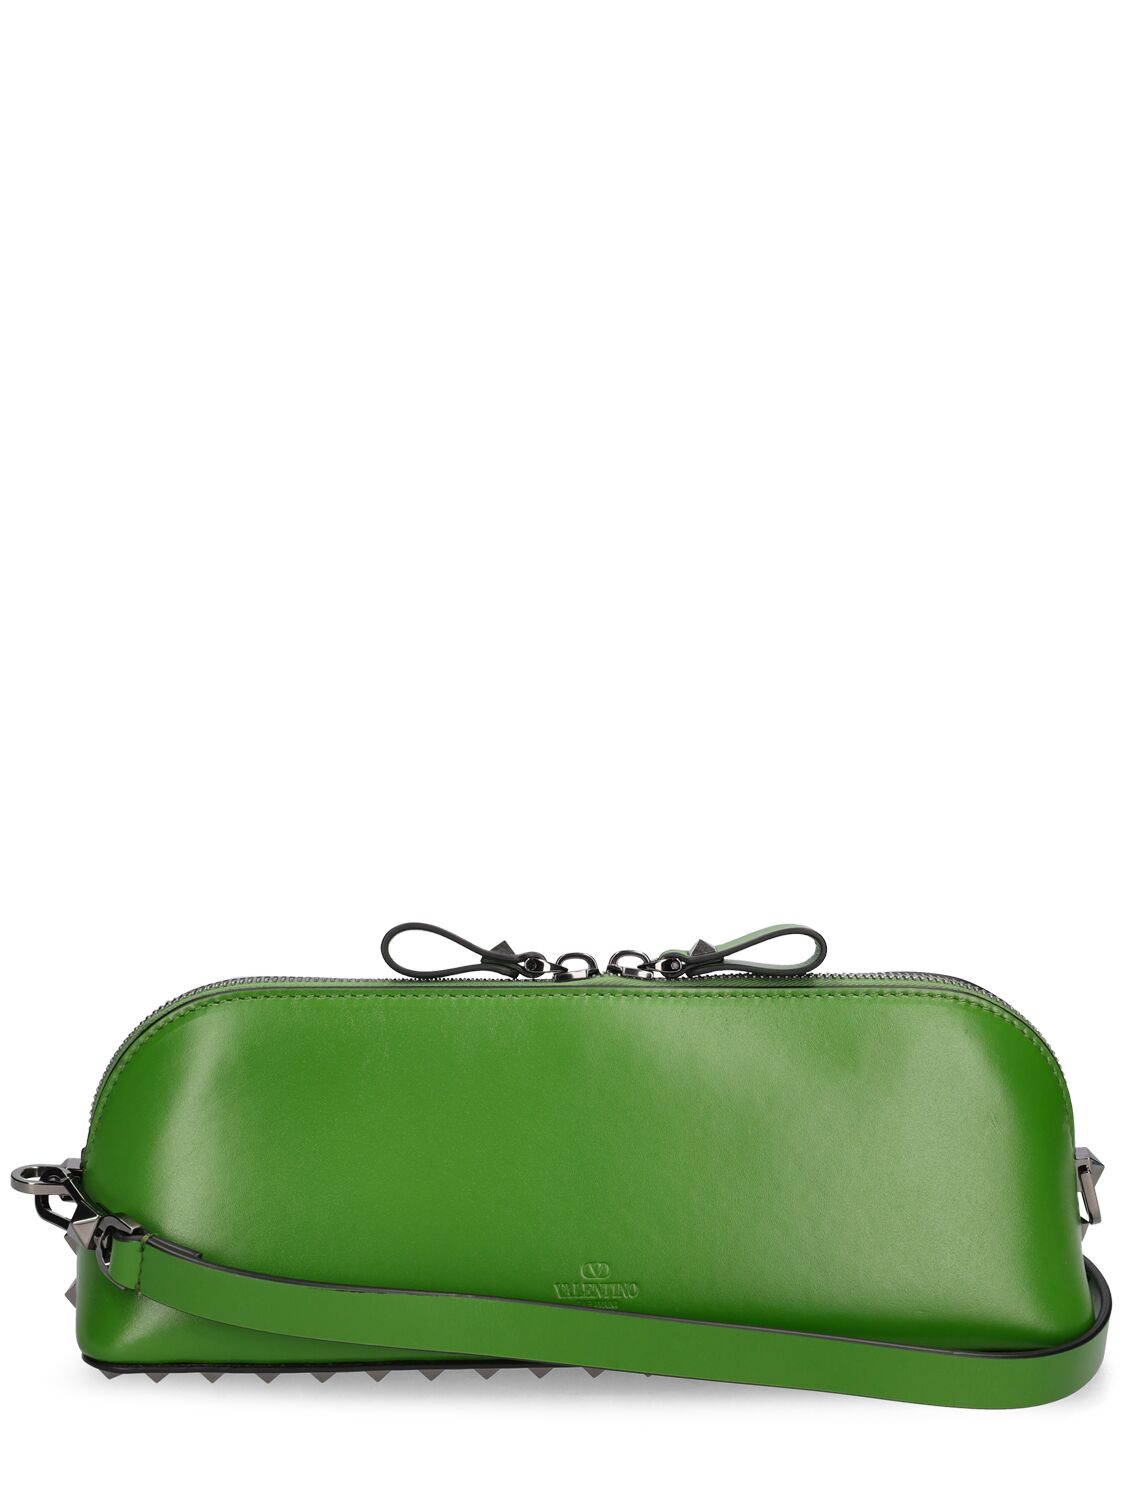 Shop Valentino Rockstud Patent Leather Clutch In Green